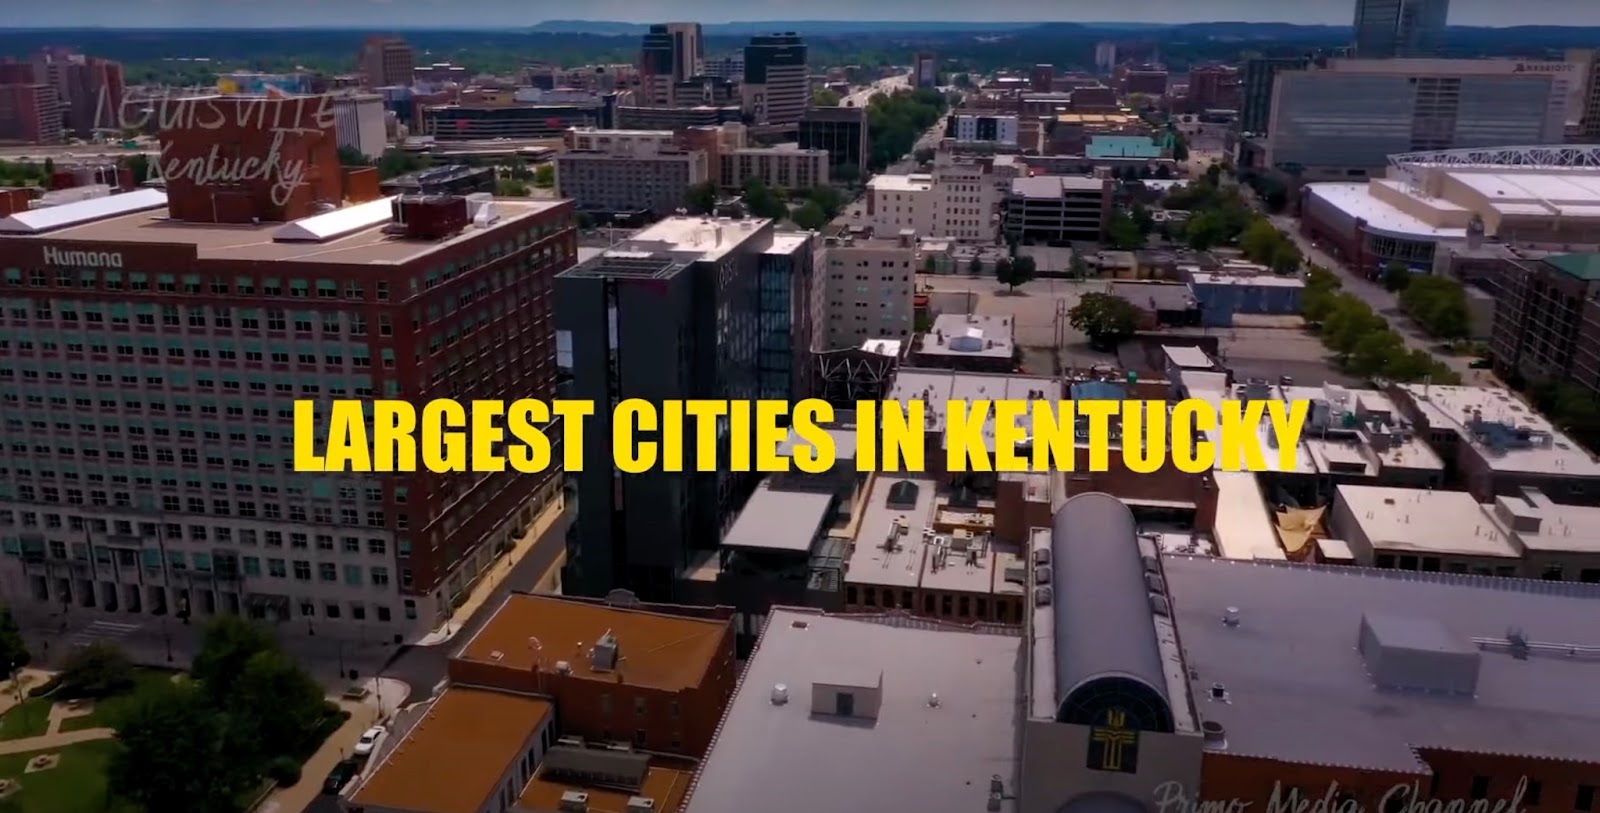 The inscription Largest Cities in Kentucky against the background of the city